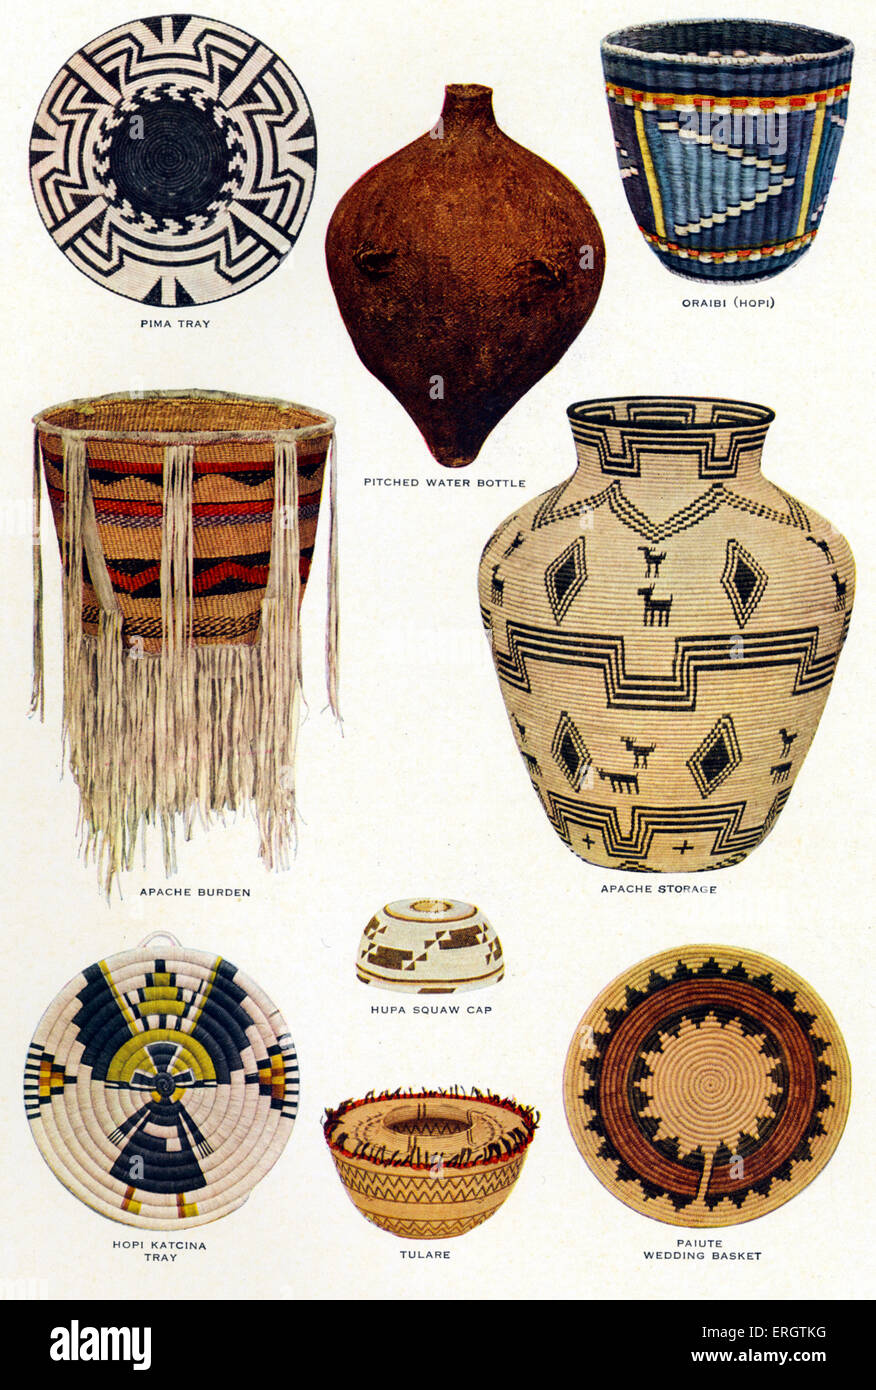 Native American basketry. A selection of hand - made baskets and trays, decorated using native dyes, feathers, beads, and bone. Pueblo Indian. American Indians. Pima Tray, pitched water bottle, oraibi (hopi), apache burden, apache storage, hupa squaw cap, hopi katcina, tulare, paiute wedding basket. Artist unknown. Stock Photo